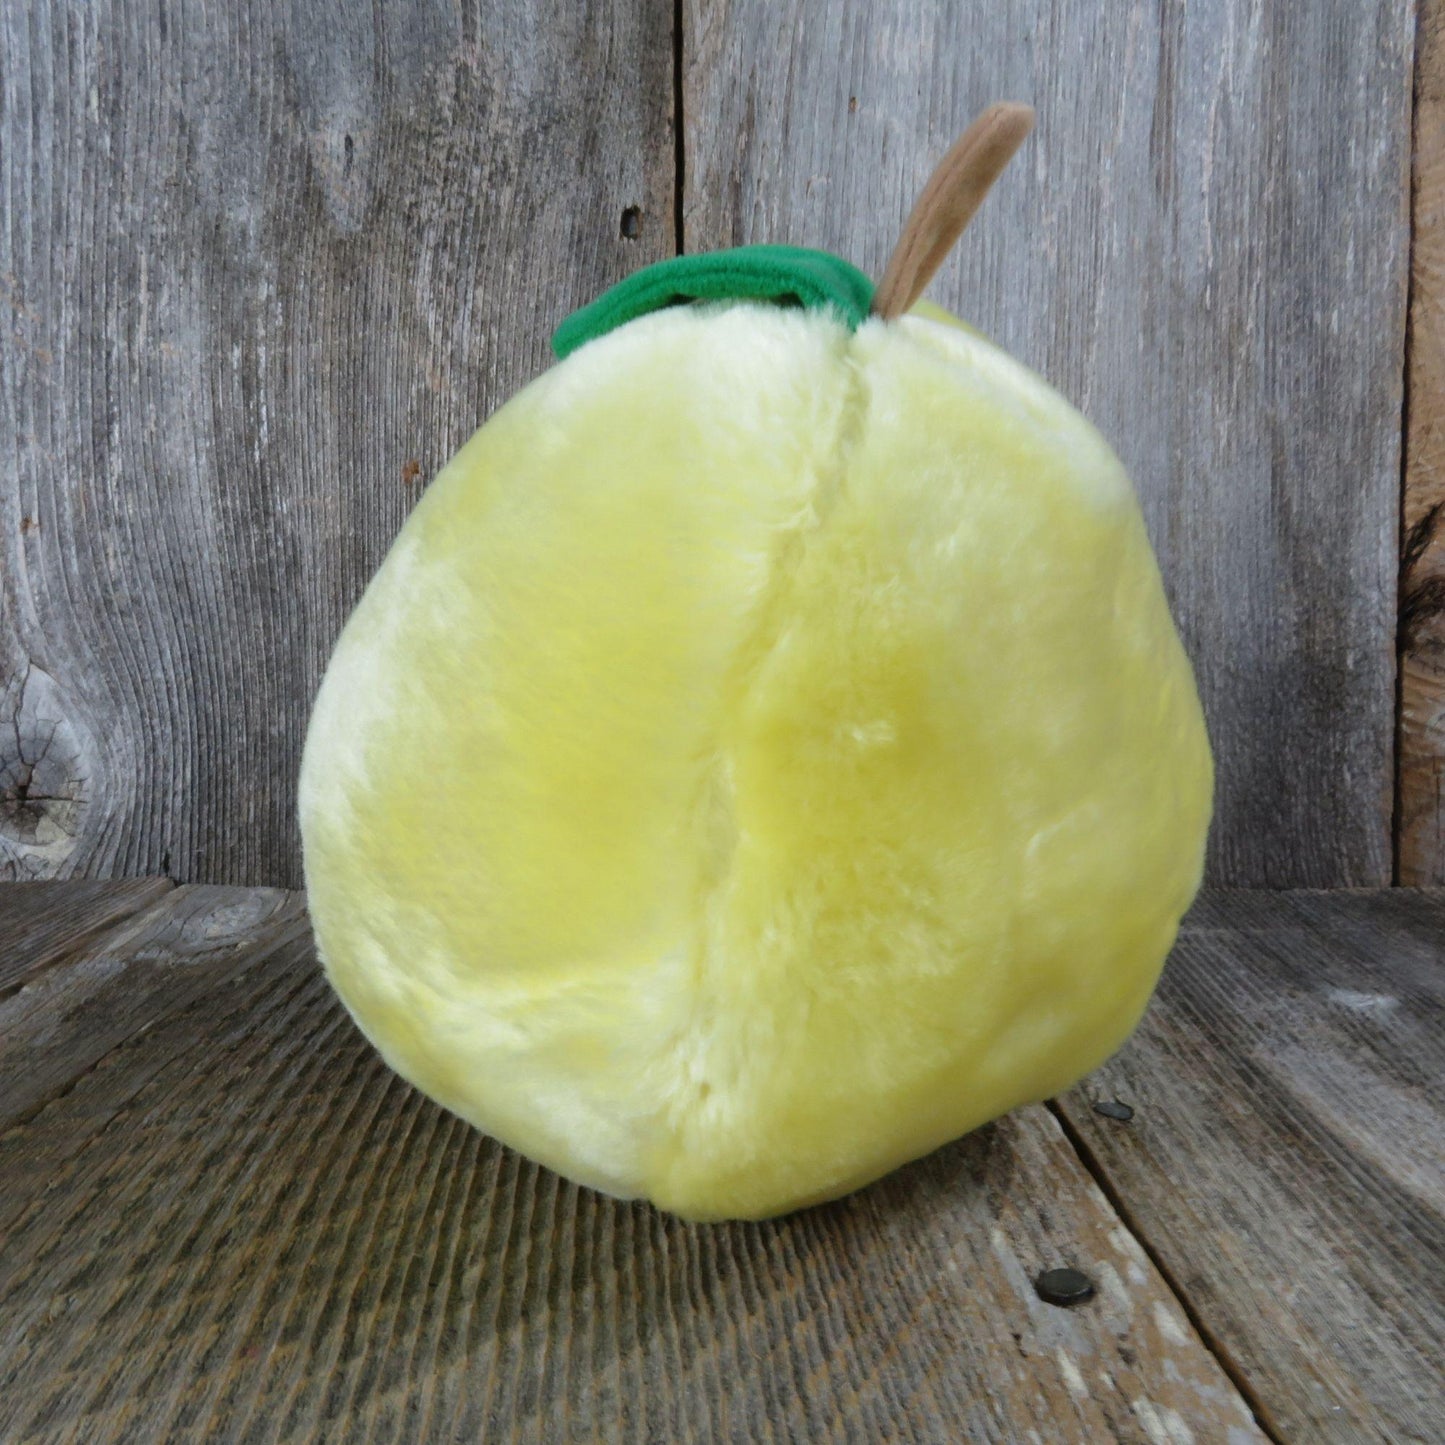 Vintage Pear Plush Precious Pear Del Monte Country Yumkin Fruit and Vegetables Trudy 1990 Green Yellow